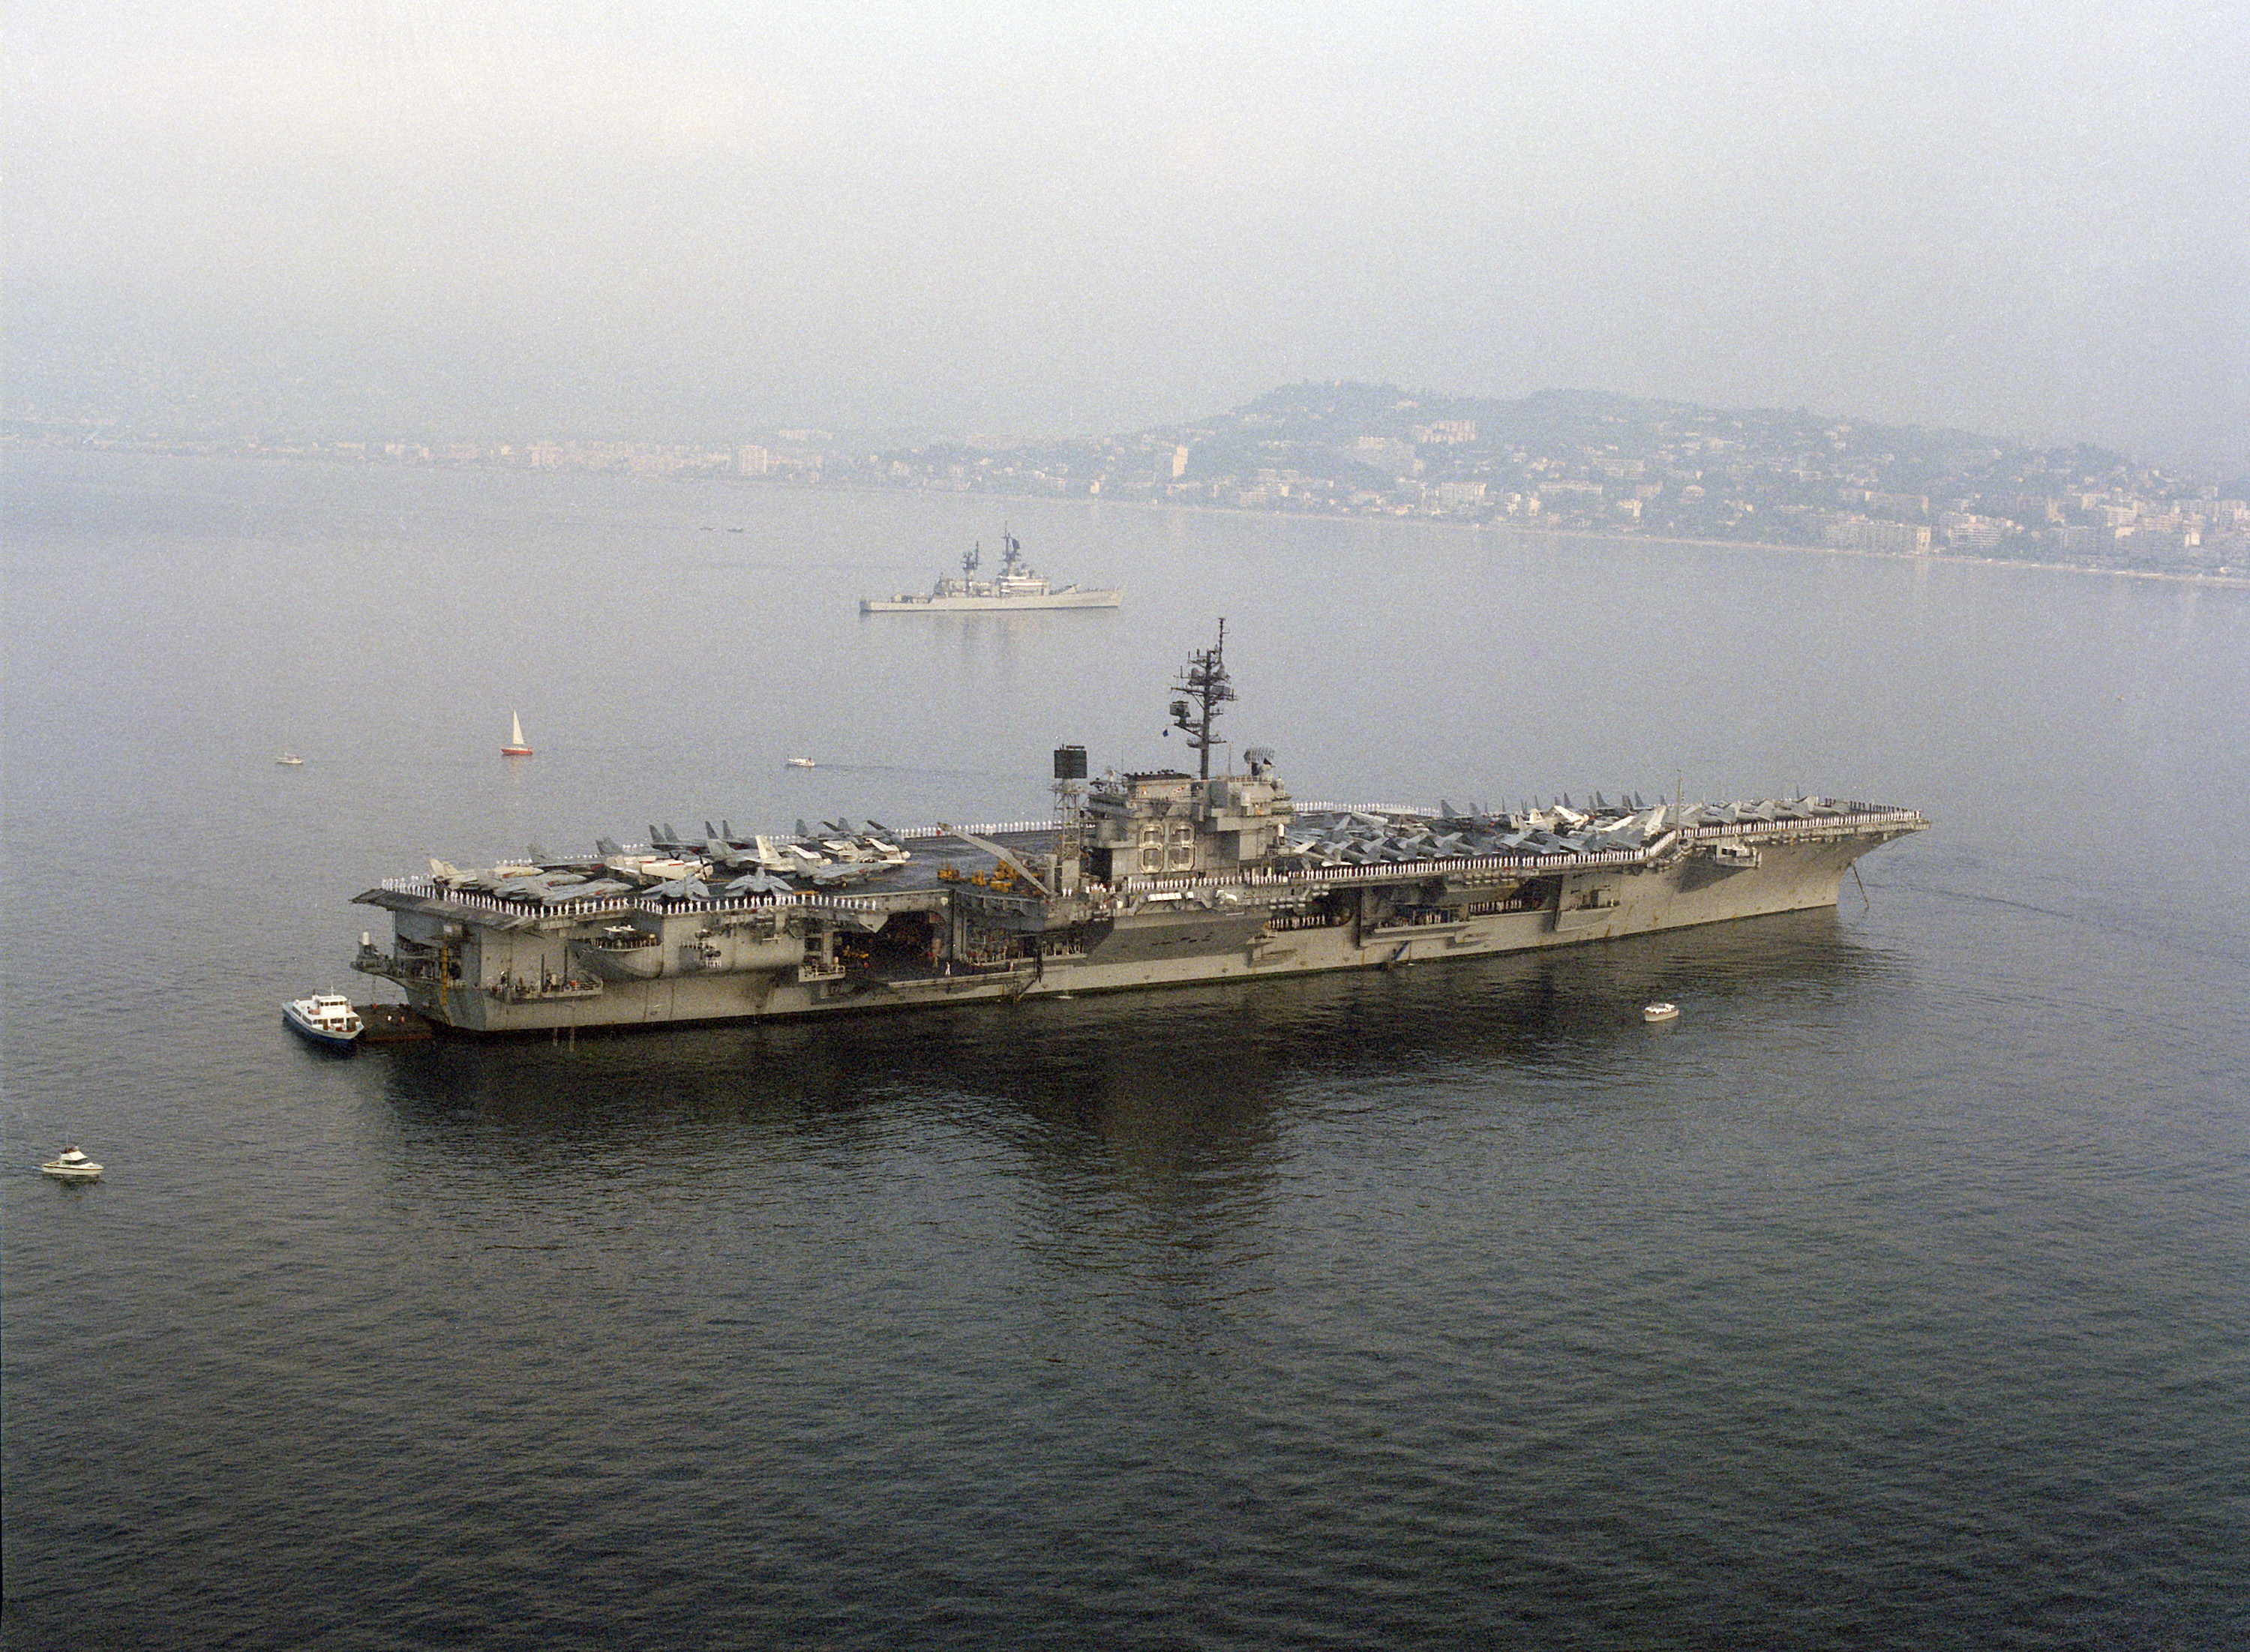 Uss kitty hawk (cv 63) anchored off the coast of cannes, france. the guided missile cruiser uss josephus daniels (cg 27) is in the background. photo